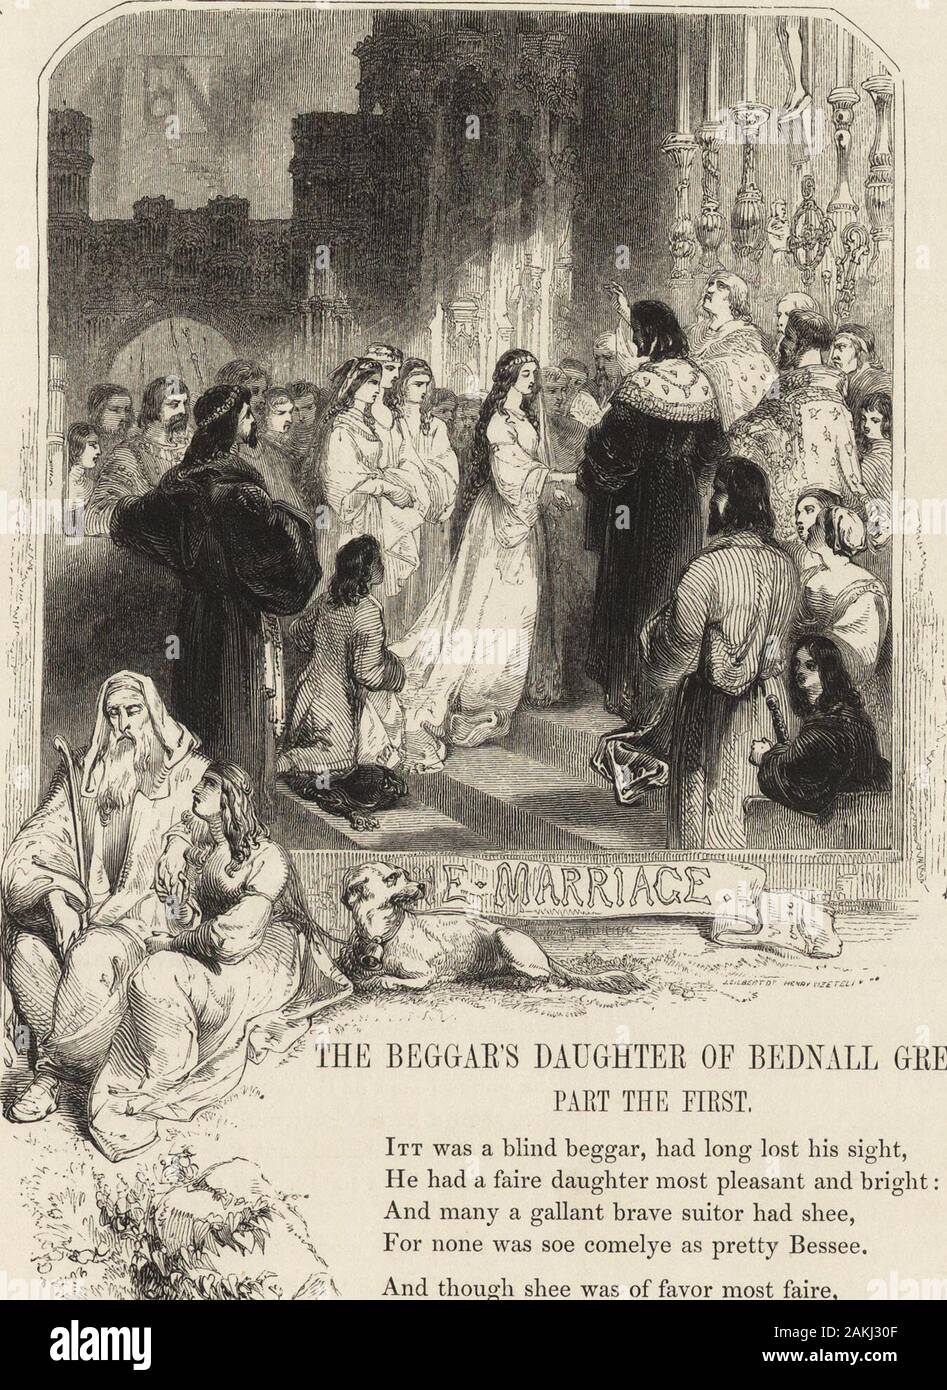 The book of British ballads . THE BEGGARS DAUGHTER OF BEDNALL GBEEN. PART THE FIRST, Itt was a blind beggar, had long lost his sight,He had a faire daughter most pleasant and bright:And many a gallant brave suitor had shee,For none was soe comelye as pretty Bessee. tjj J&A And though shee was of favor most faire,* ty^Jmfi l,vKi,J Yett seeing she was but a poor beggars heyrev-t Of ancyent housekeepers despised was shee, Whose sonnes came as suitors to prettye Bessee. Vizetelly, sc. Stock Photo